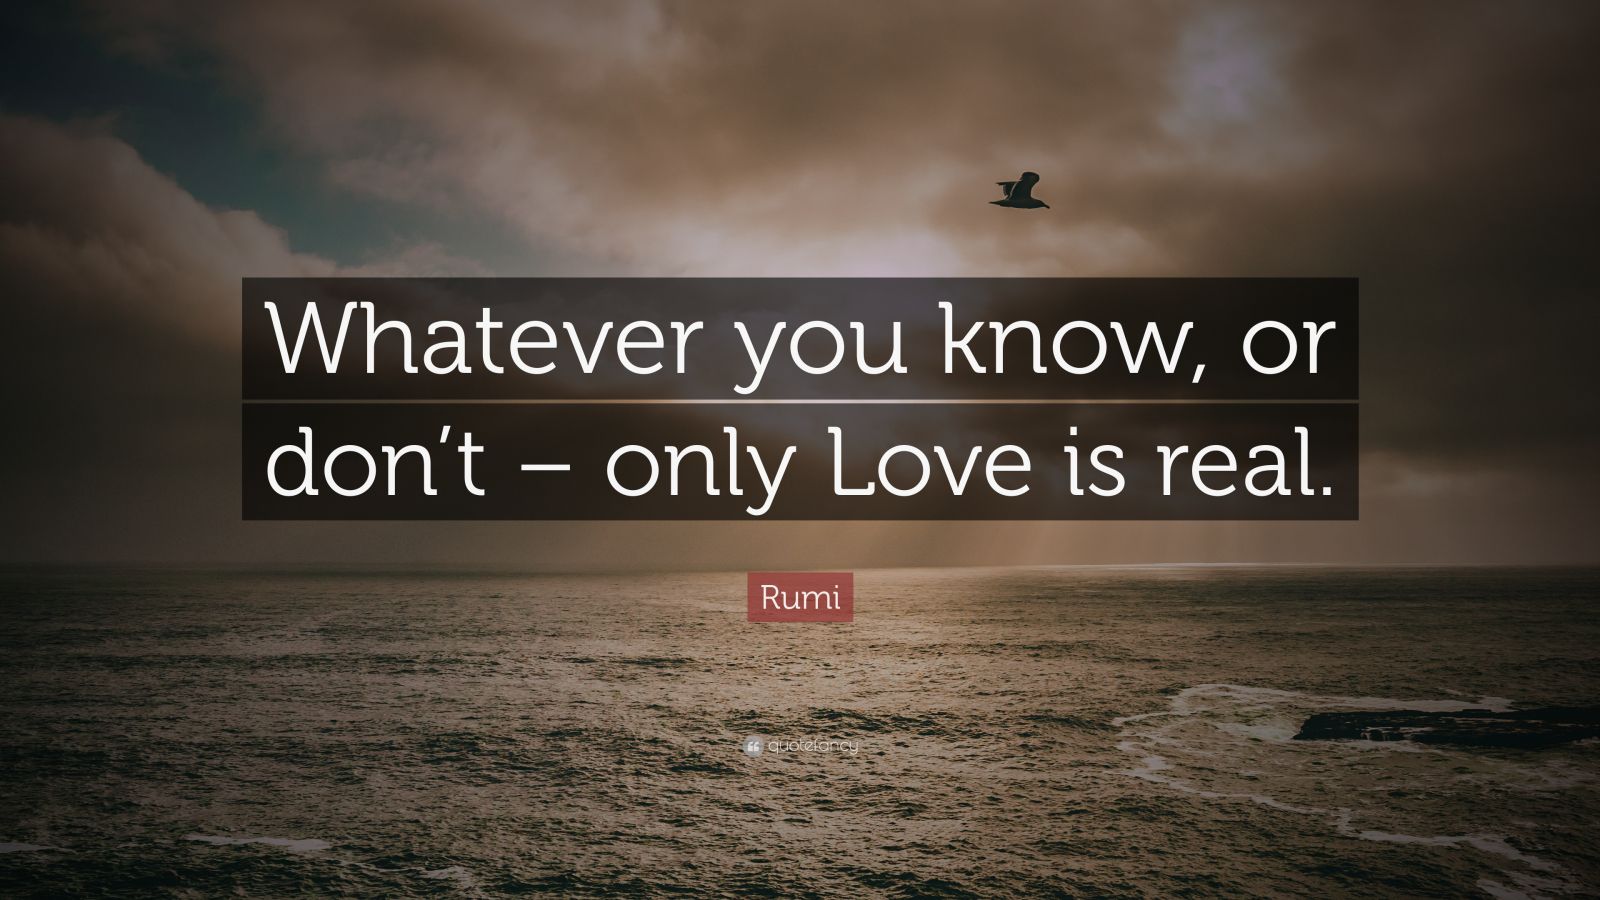 Rumi Quote “Whatever you know, or don’t only Love is